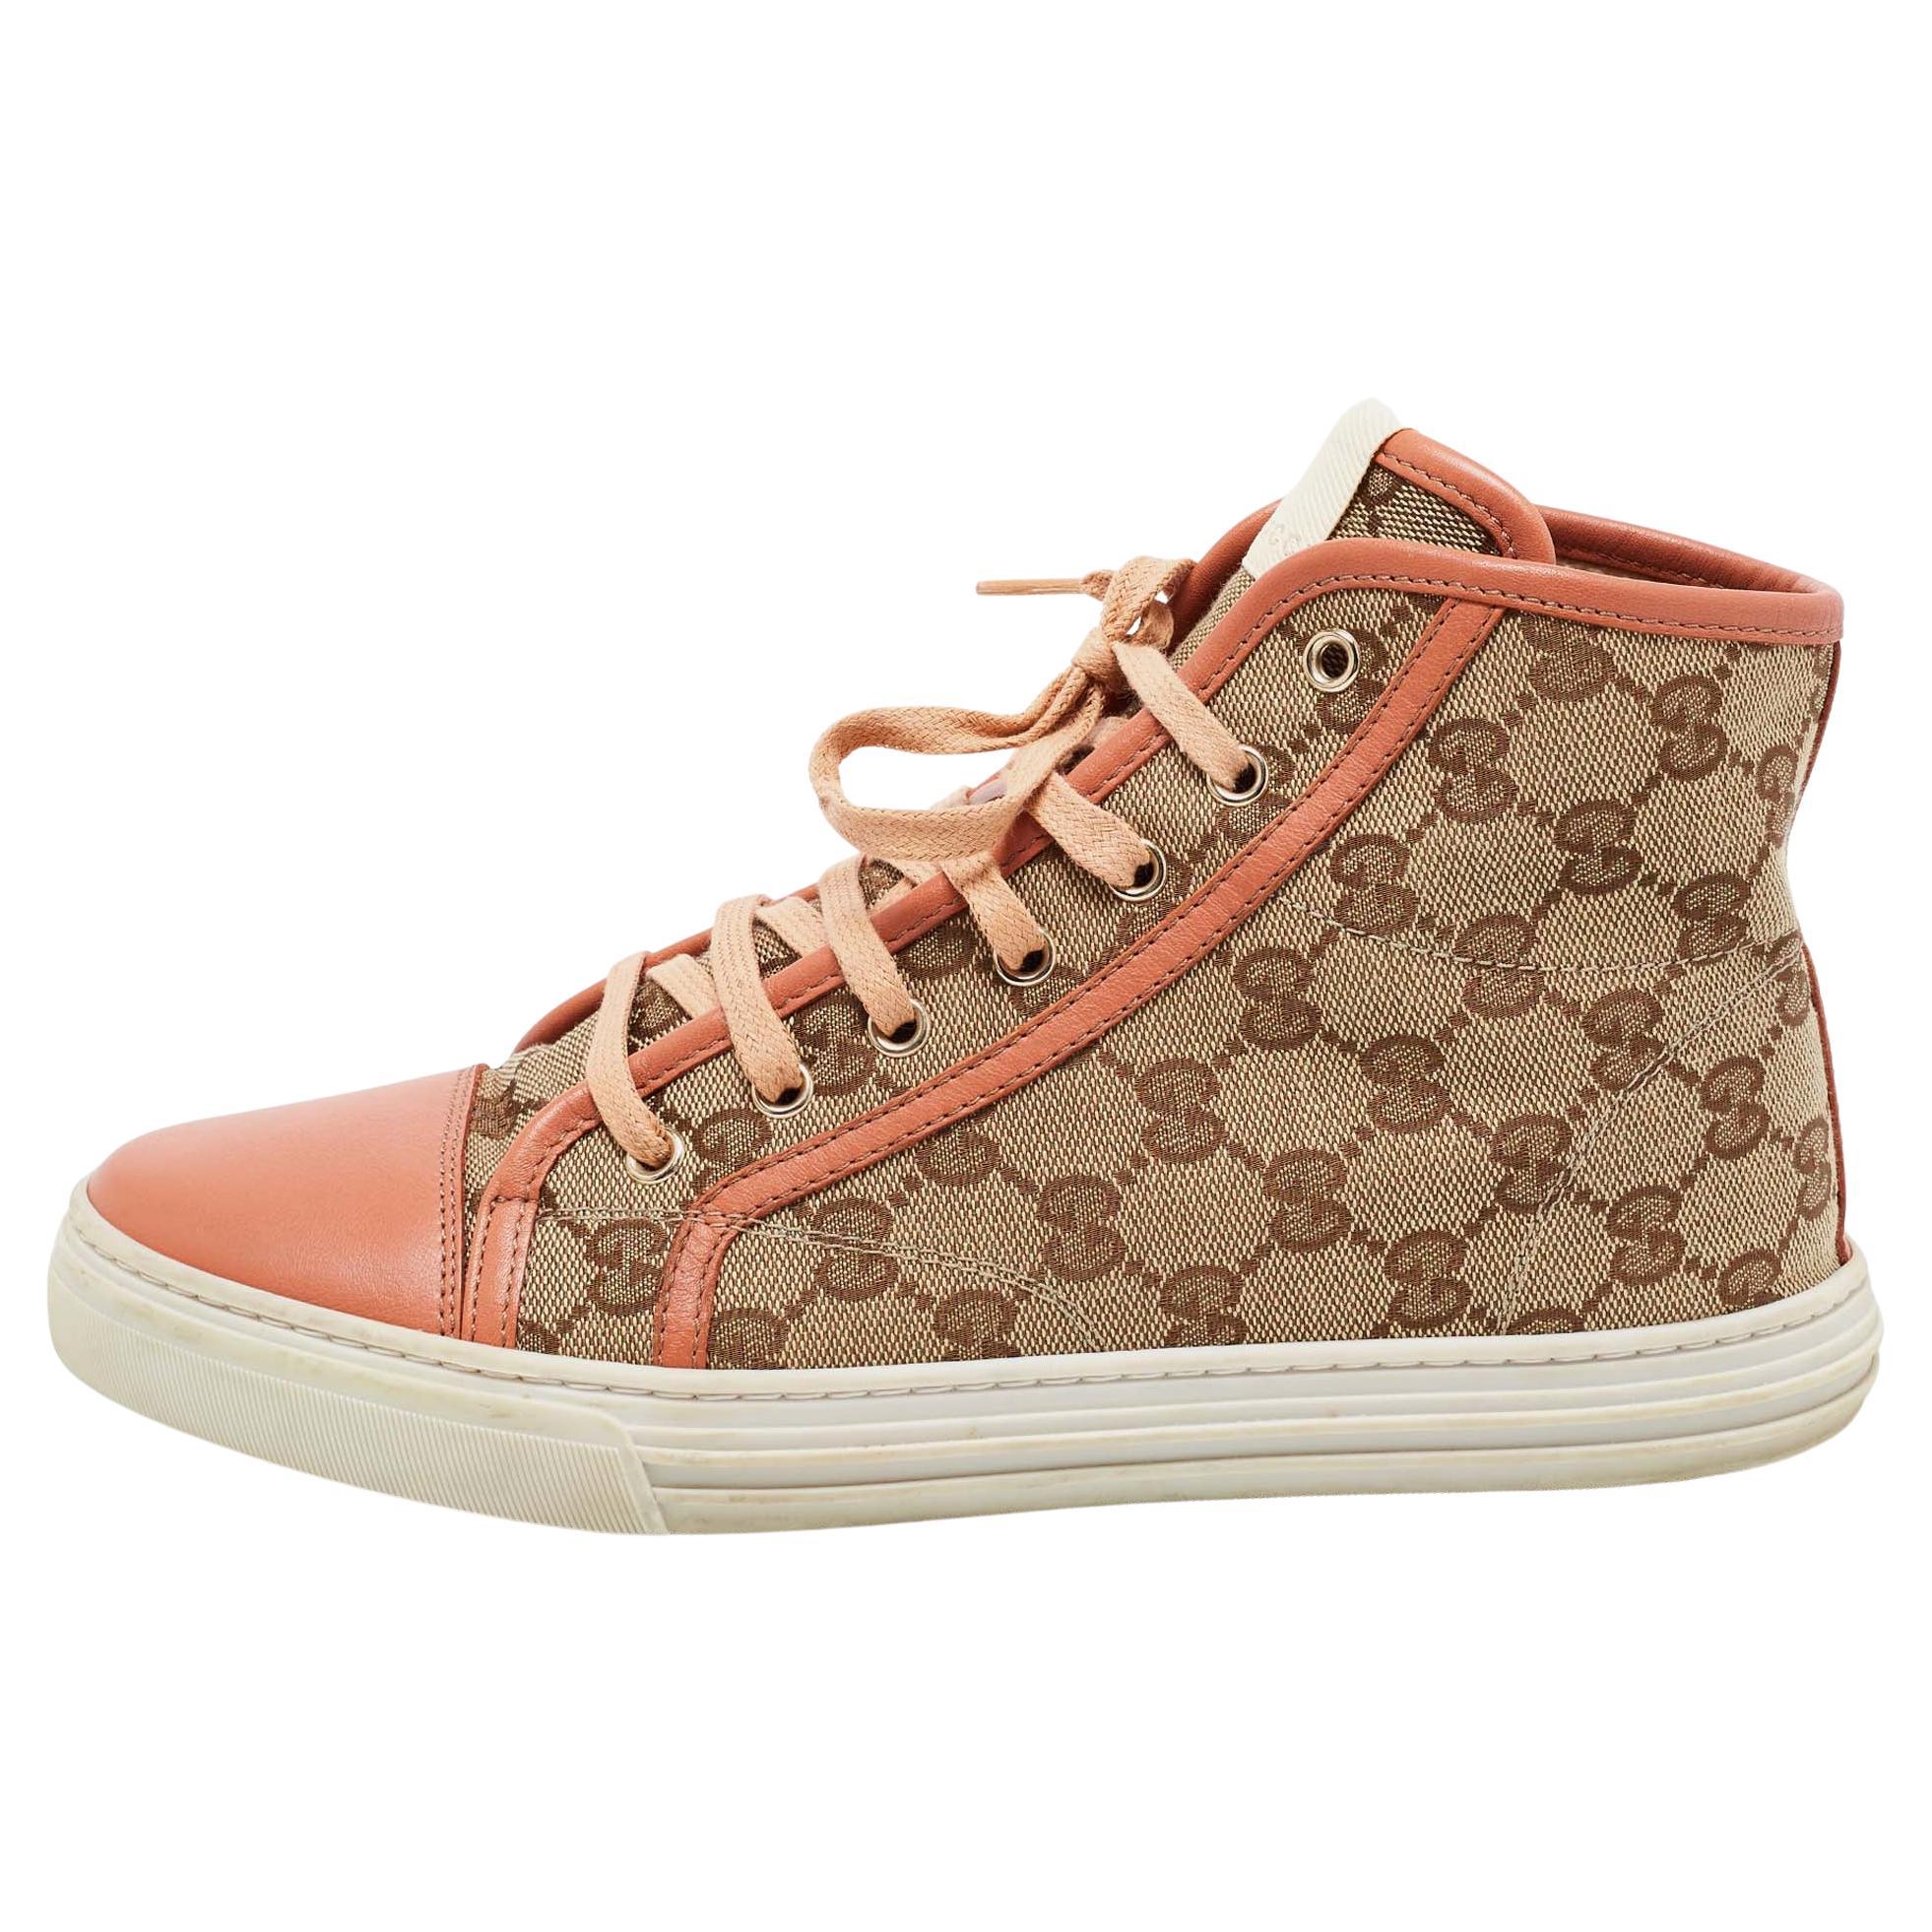 Gucci Beige/Brown GG Supreme Canvas And Leather High Top Sneakers Size ...